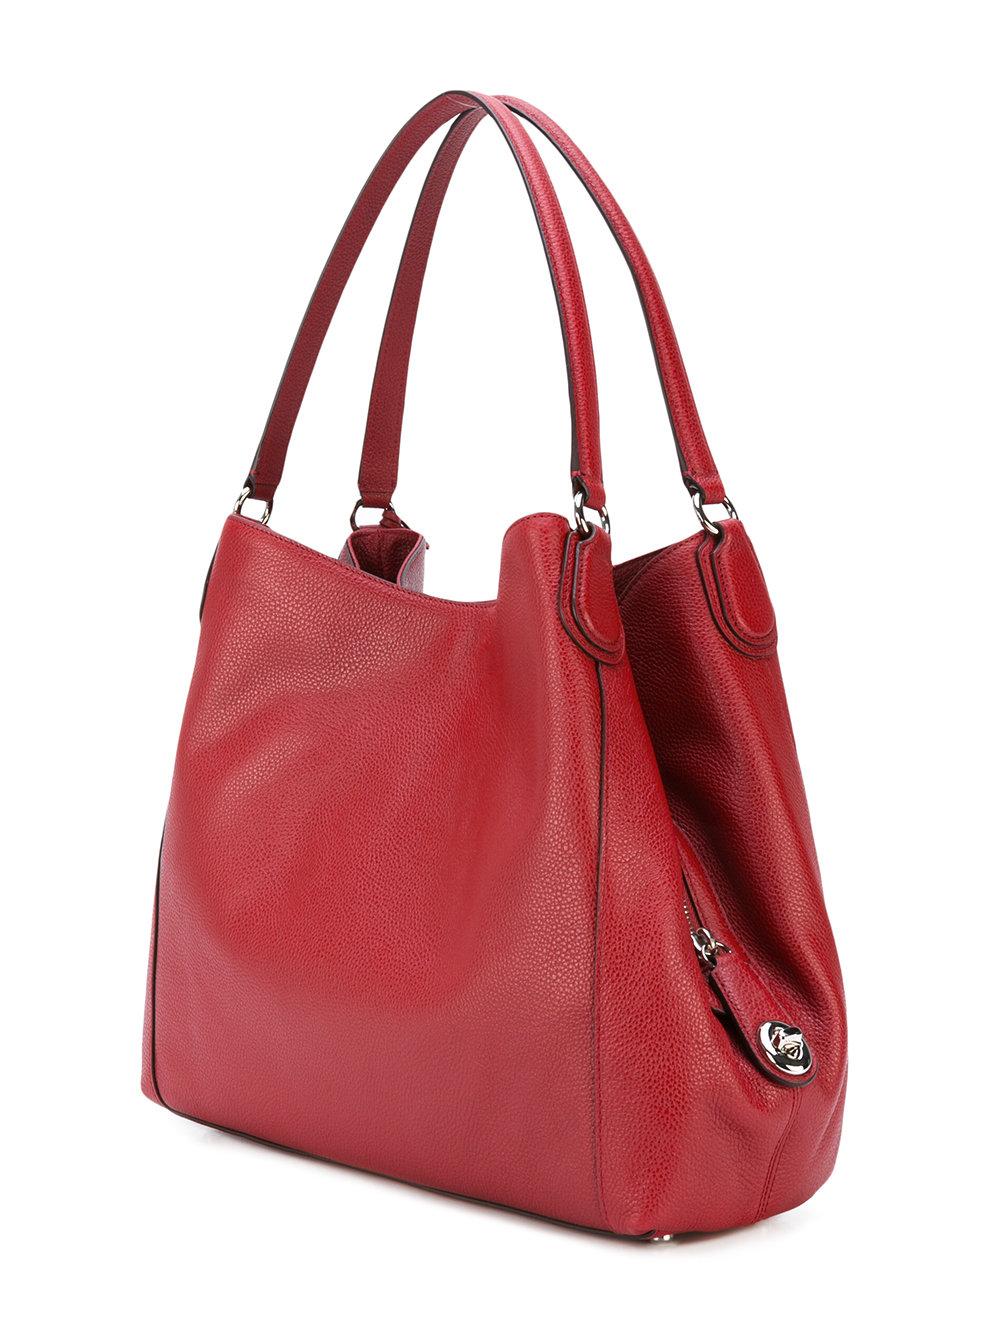 COACH Leather Edie Shoulder Bag in Red - Lyst